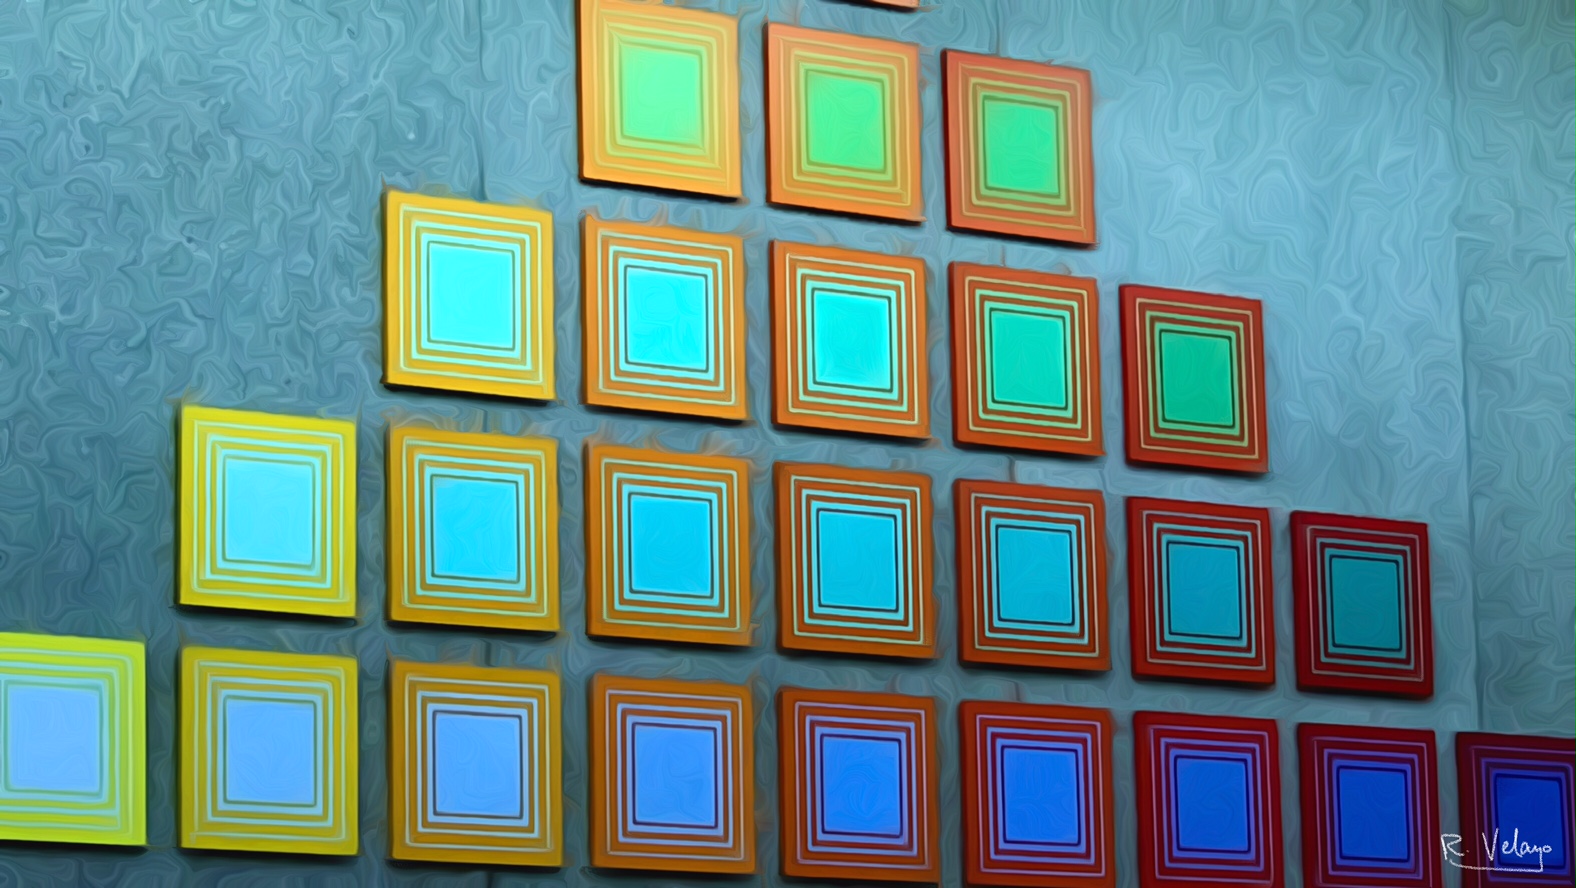 "ROWS OF COLORFUL FRAMED SQUARES" [Created: 8/24/2021]